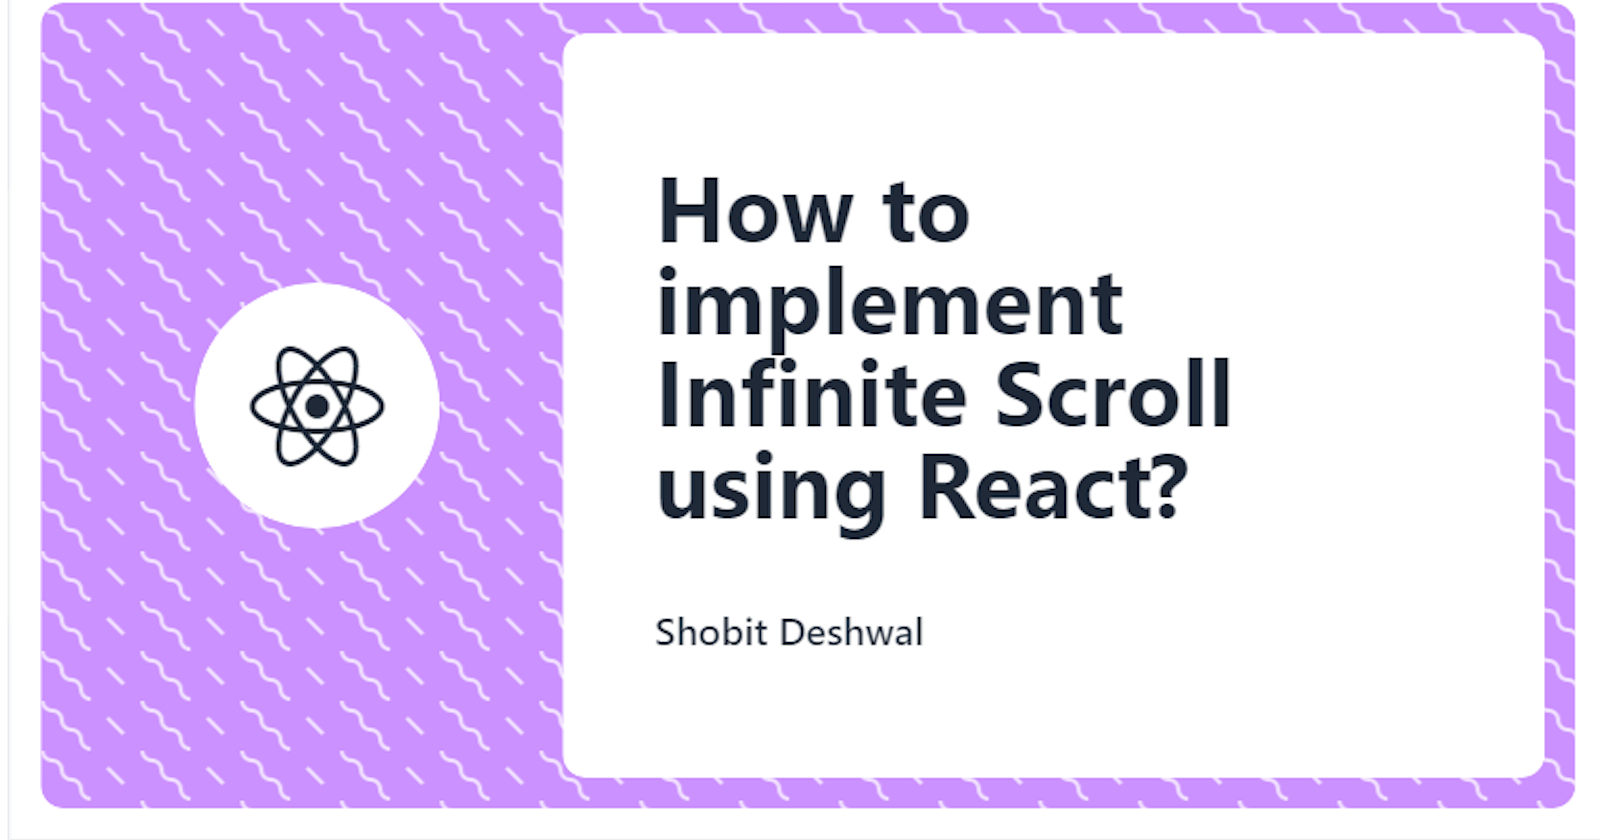 How to implement Infinite Scroll using React?